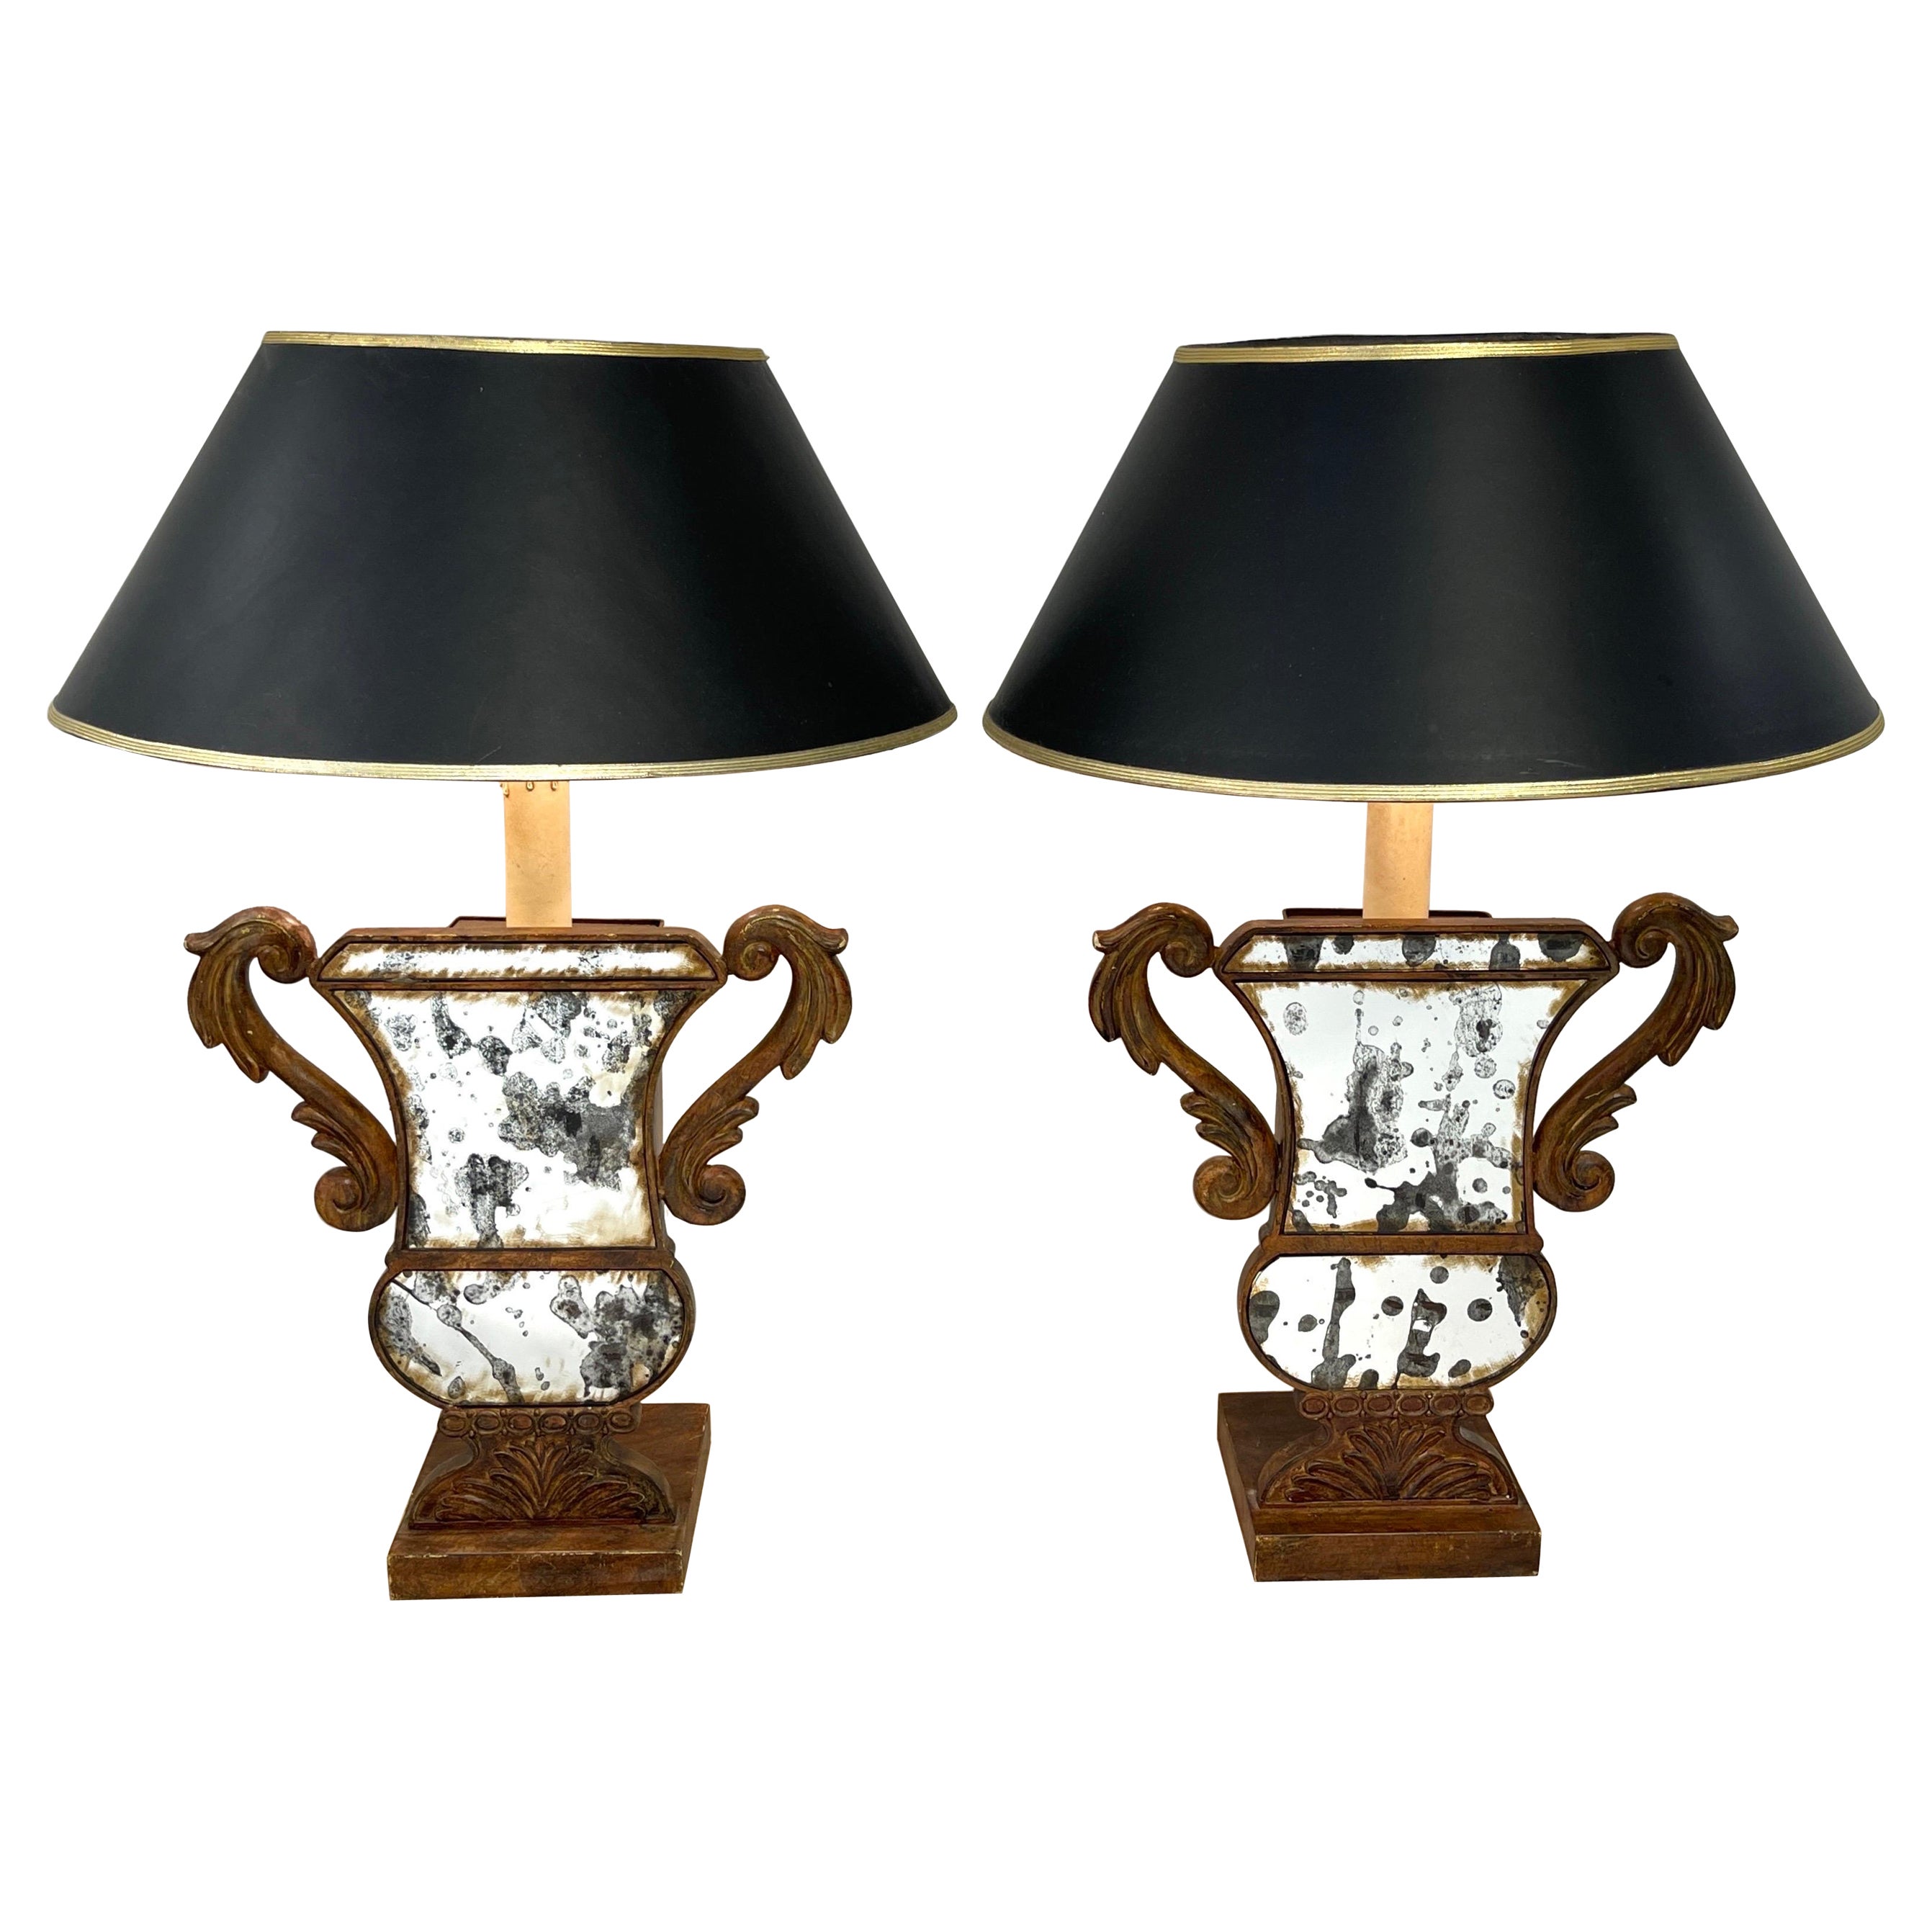 A Pair of Neoclassical Tole & Eglomise Mirrored Urn Motif Lamps For Sale